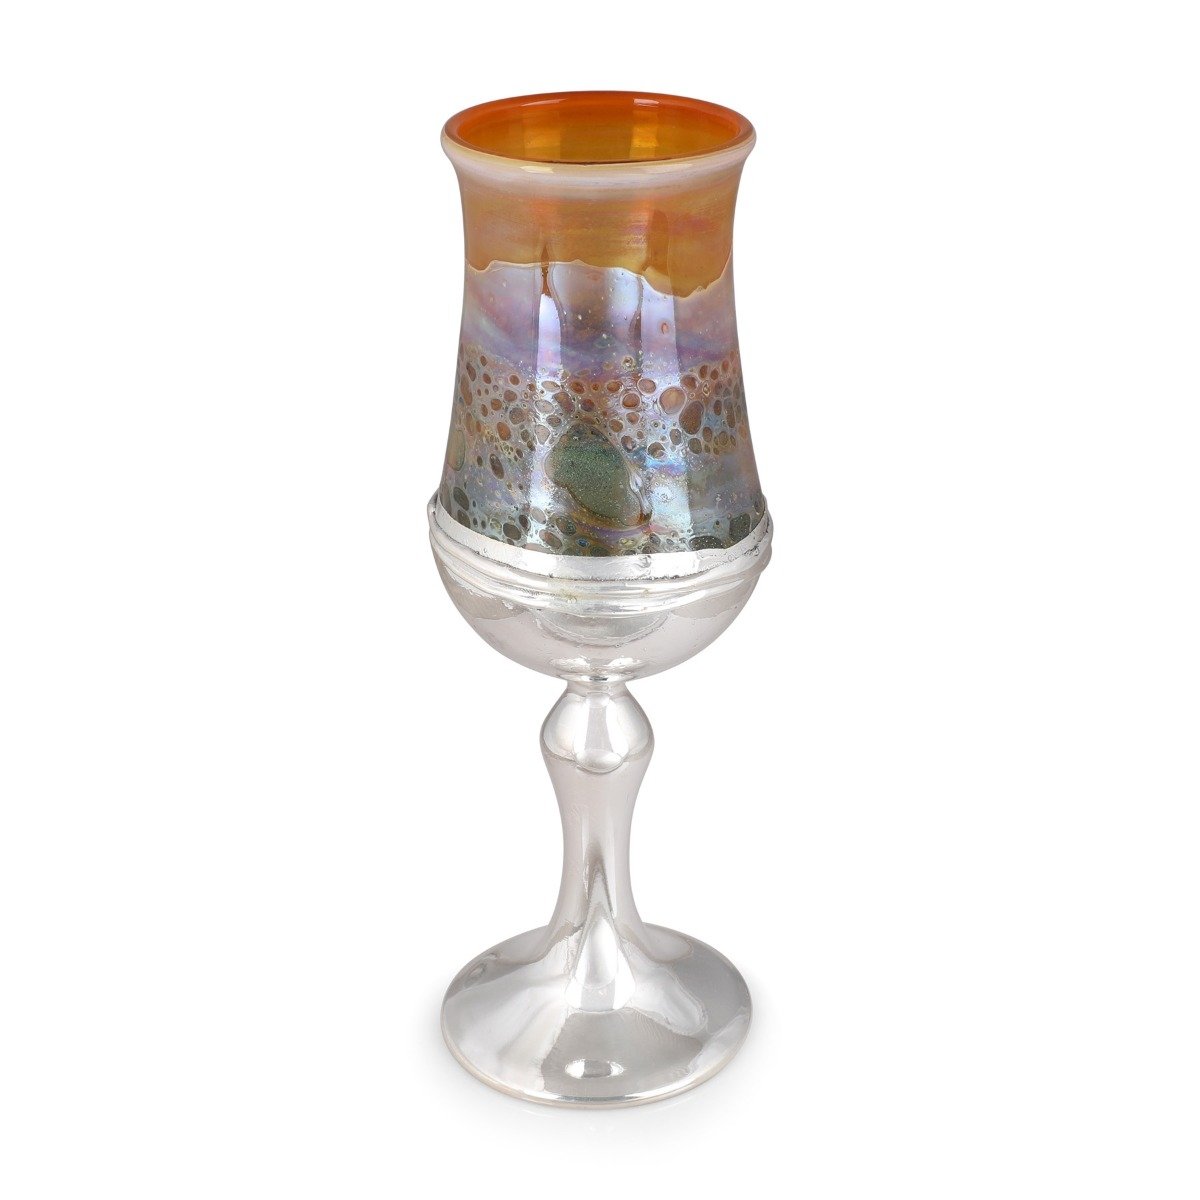 Handmade Multicolored Glass and Sterling Silver-Plated Kiddush Cup - 1